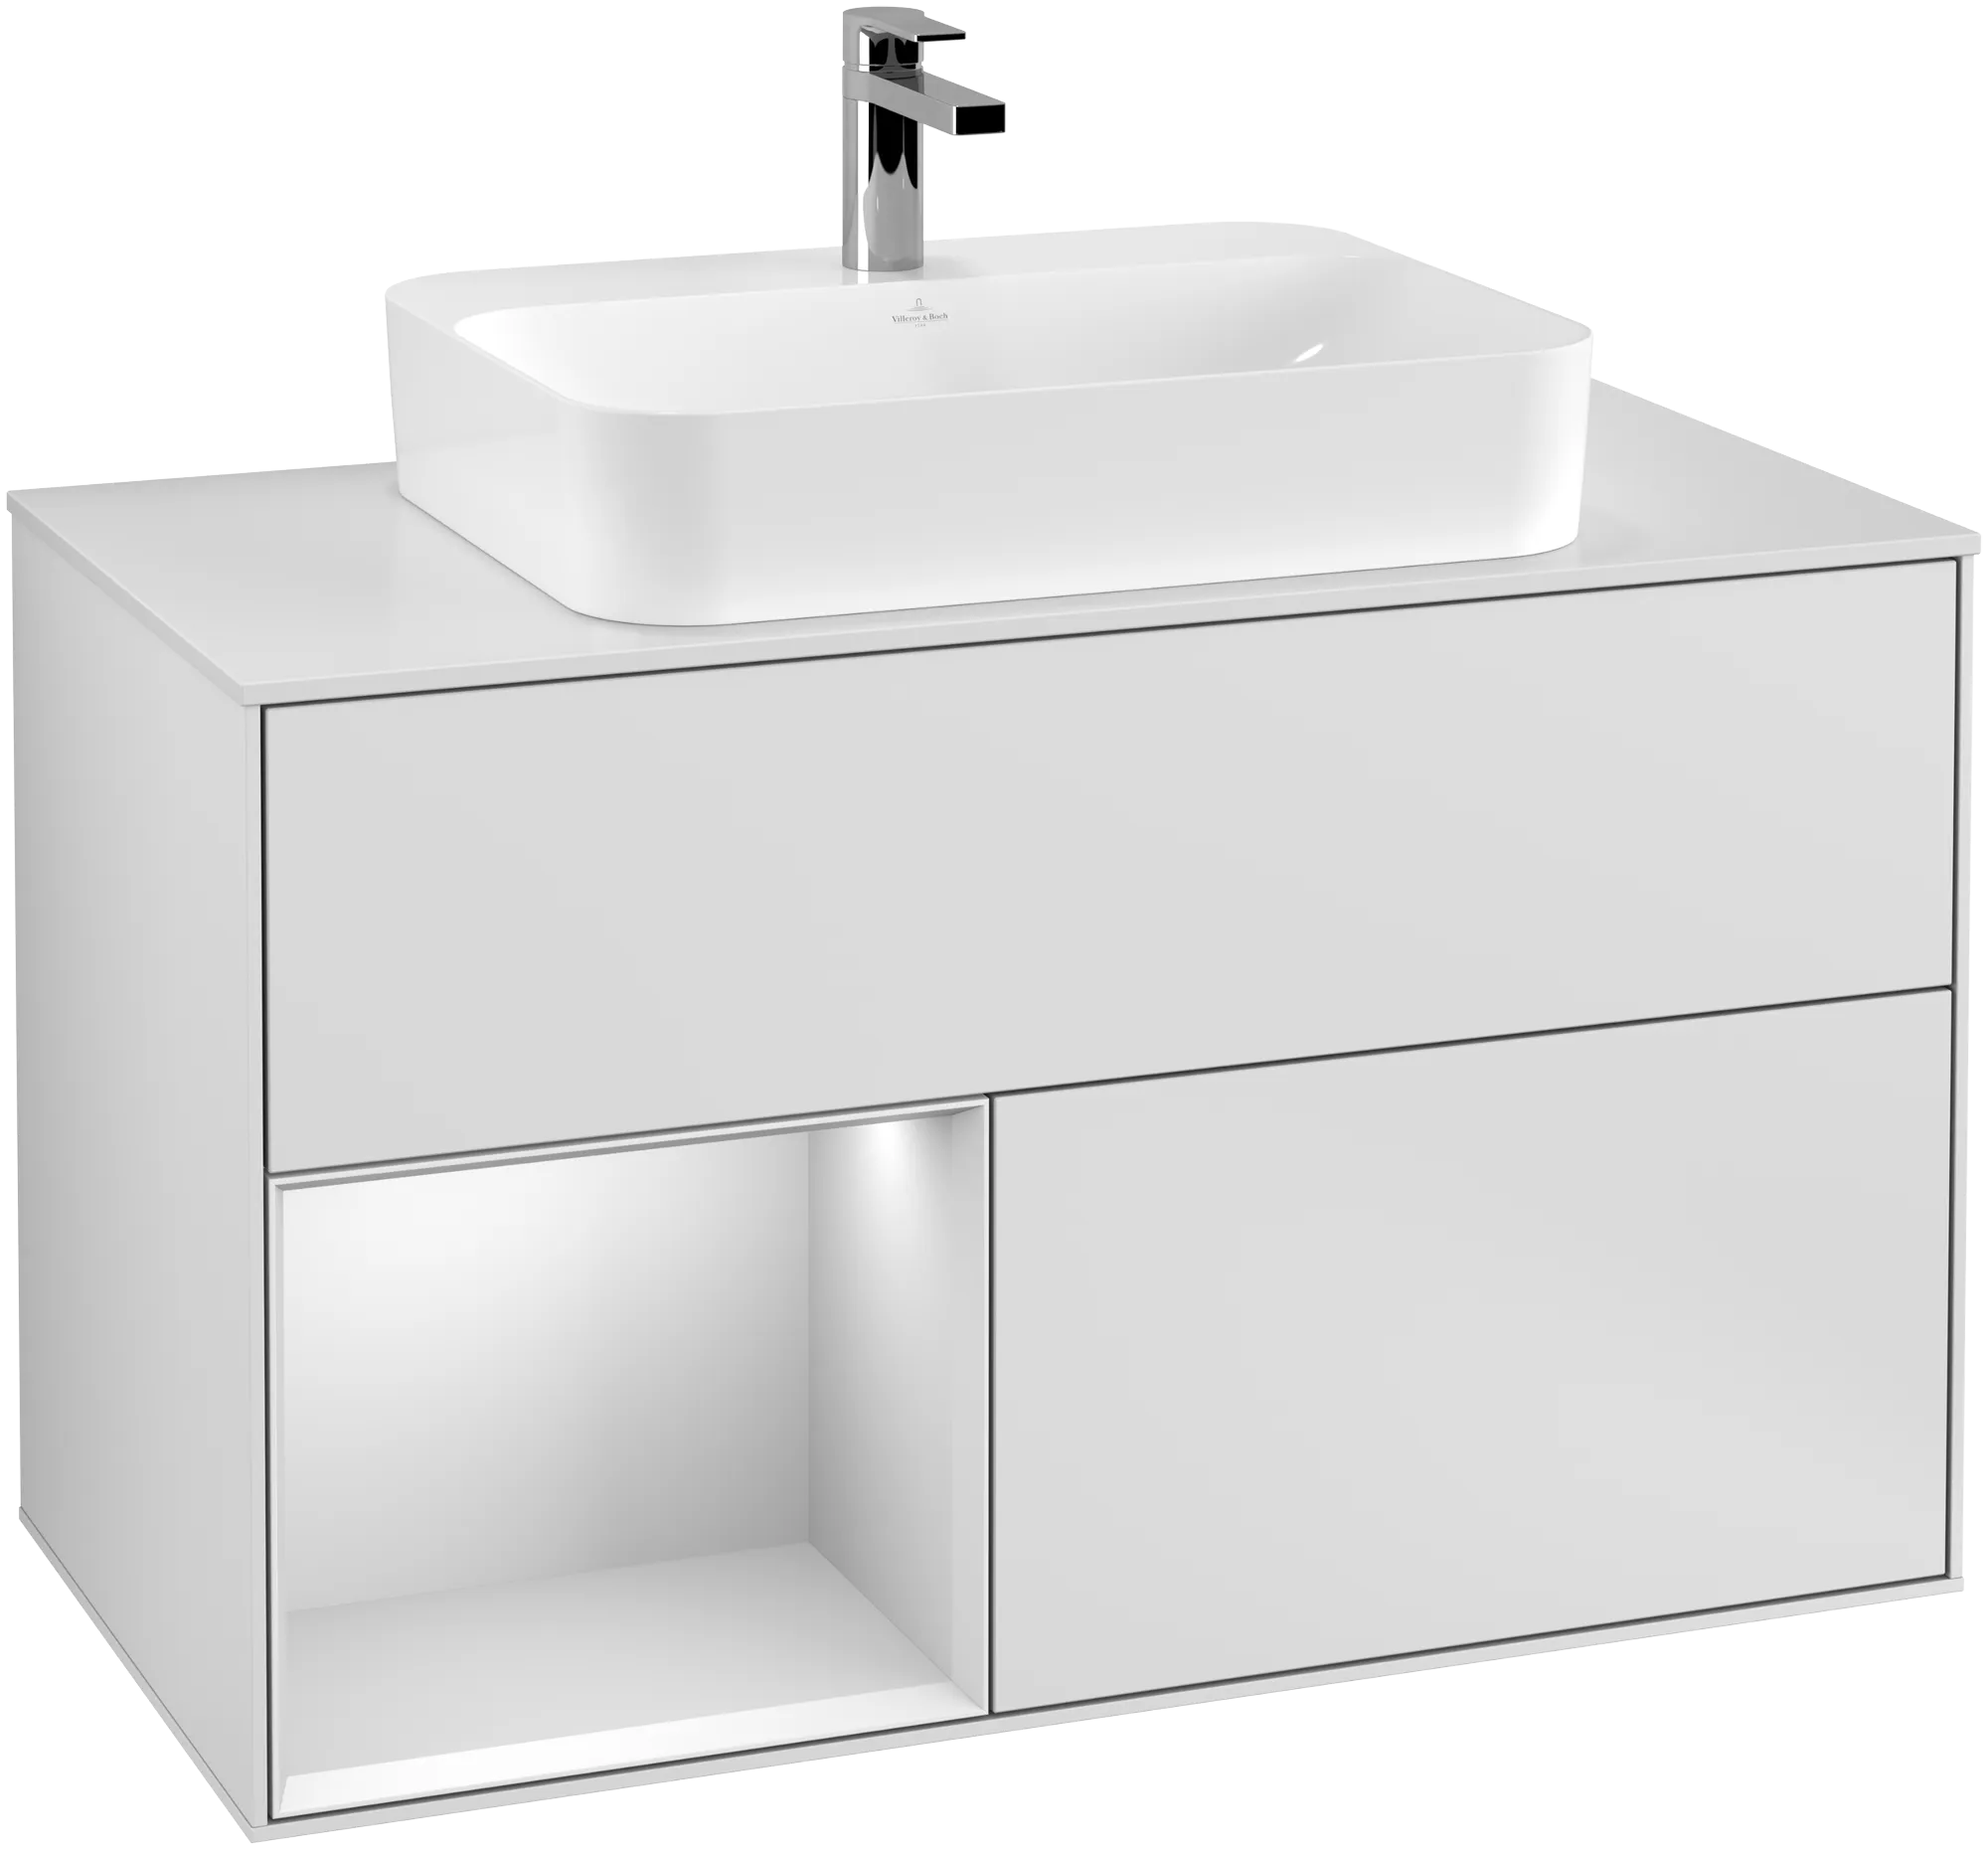 Obrázek VILLEROY BOCH Finion Vanity unit, with lighting, 2 pull-out compartments, 1000 x 603 x 501 mm, White Matt Lacquer / White Matt Lacquer / Glass White Matt #G361MTMT